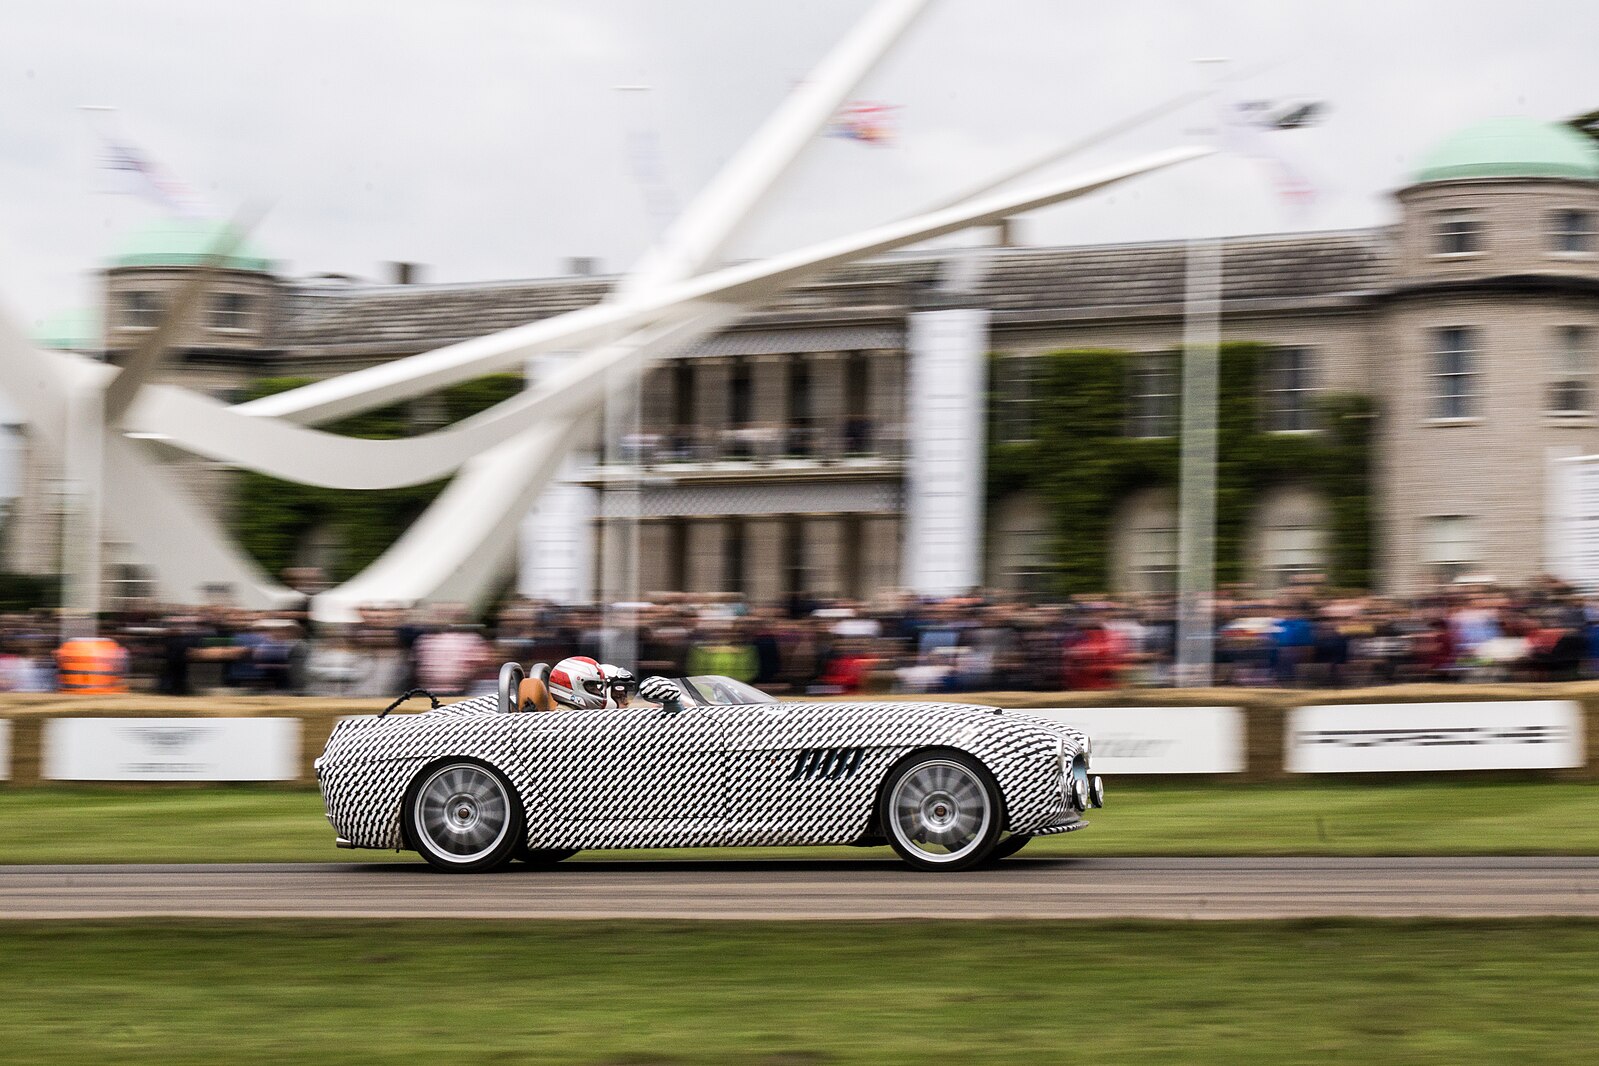 The Thrilling Goodwood Festival of Speed